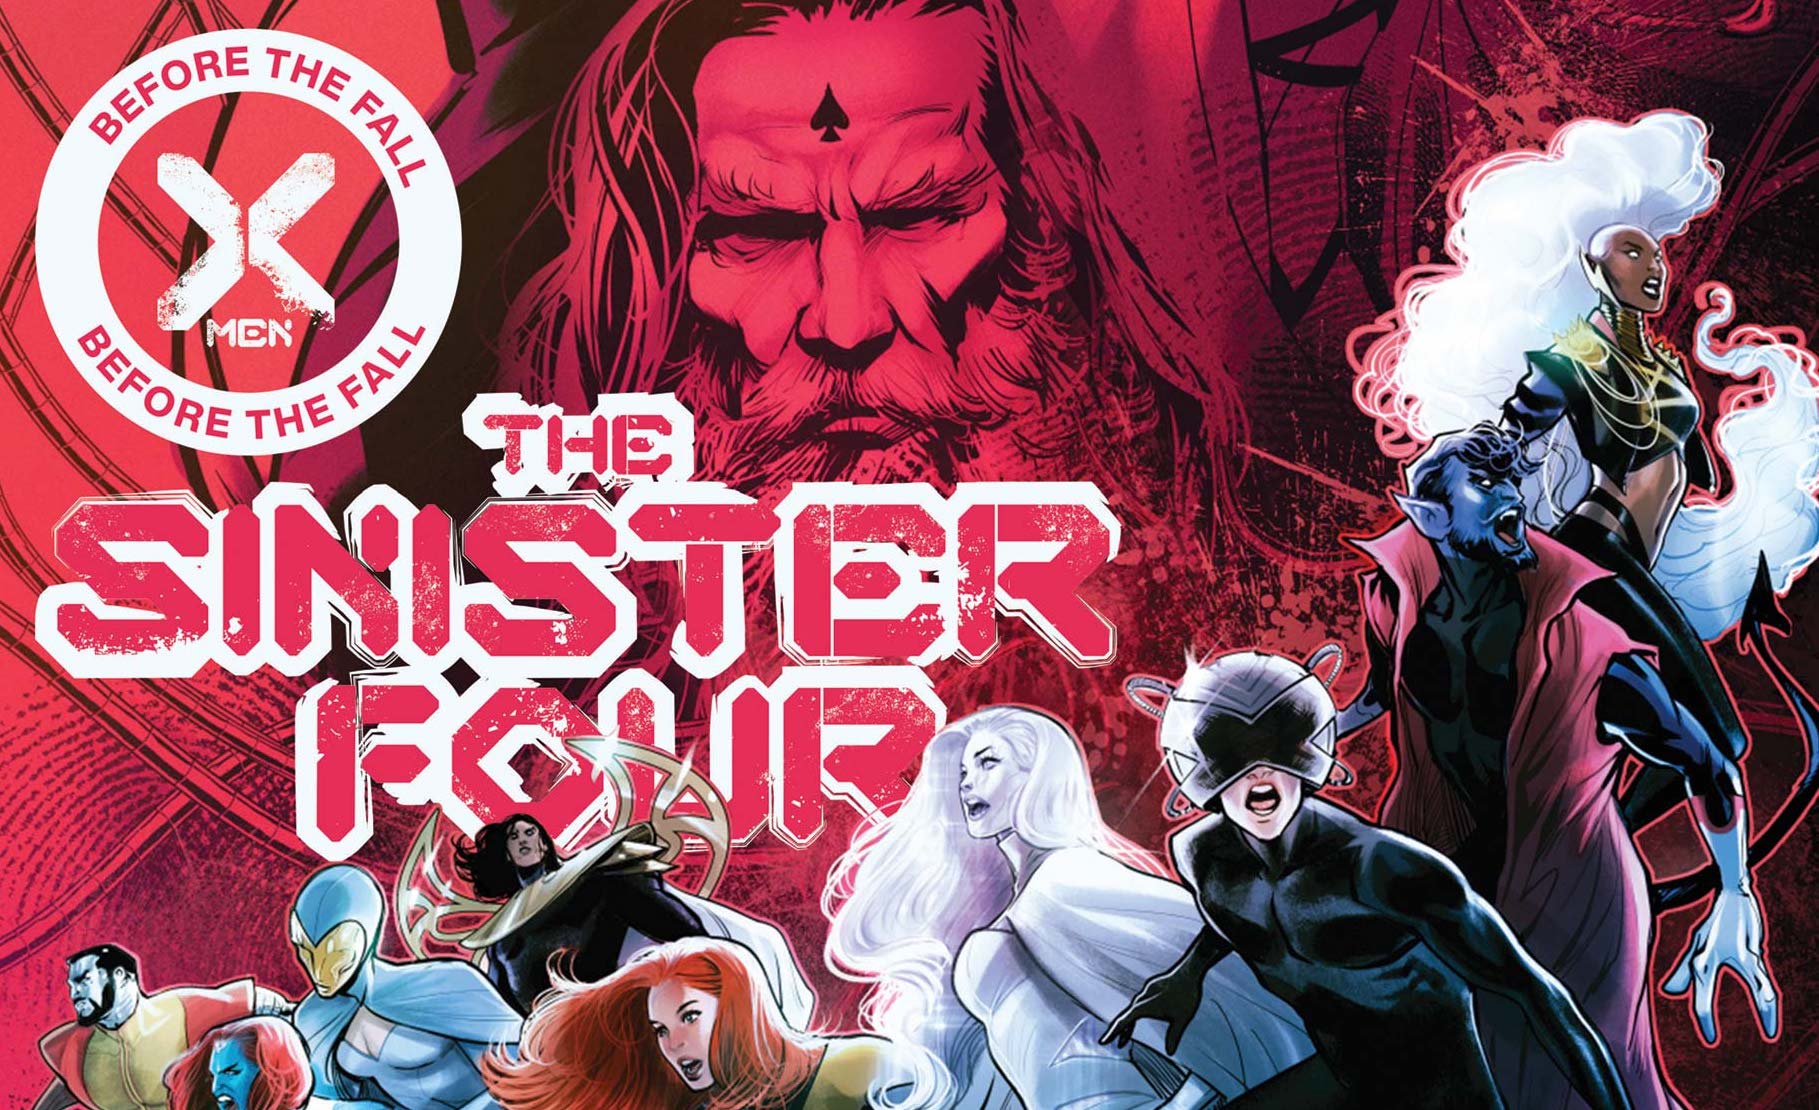 X-Men: Before the Fall — The Sinister Four #1